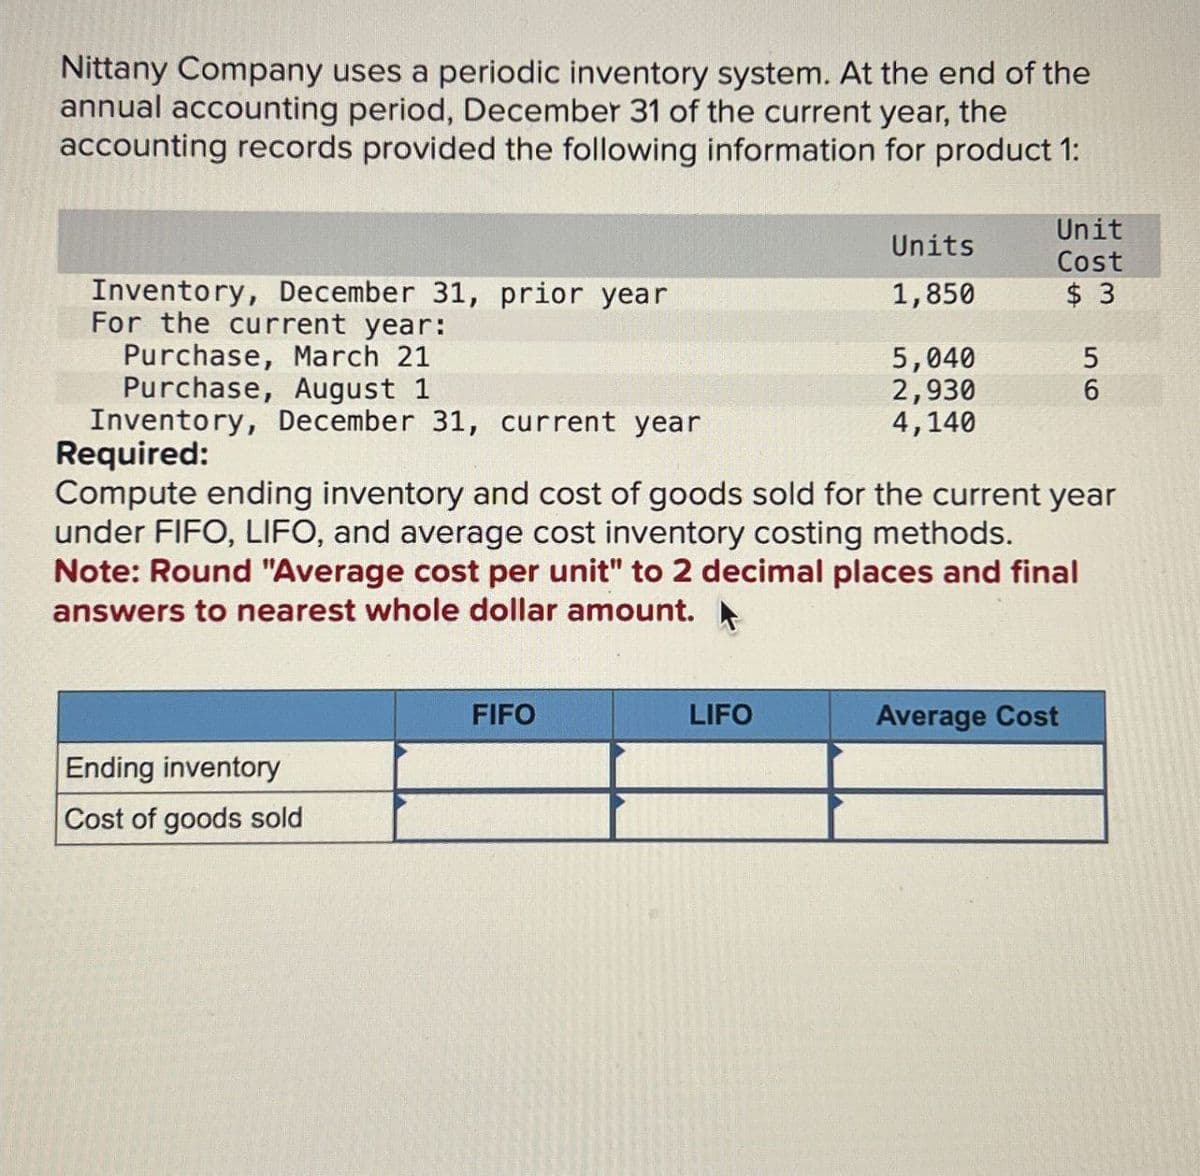 Nittany Company uses a periodic inventory system. At the end of the
annual accounting period, December 31 of the current year, the
accounting records provided the following information for product 1:
Inventory, December 31, prior year
For the current year:
Purchase, March 21
Purchase, August 1
Inventory, December 31, current year
Required:
Unit
Units
Cost
1,850
$ 3
5,040
2,930
56
4,140
Compute ending inventory and cost of goods sold for the current year
under FIFO, LIFO, and average cost inventory costing methods.
Note: Round "Average cost per unit" to 2 decimal places and final
answers to nearest whole dollar amount.
Ending inventory
Cost of goods sold
FIFO
LIFO
Average Cost